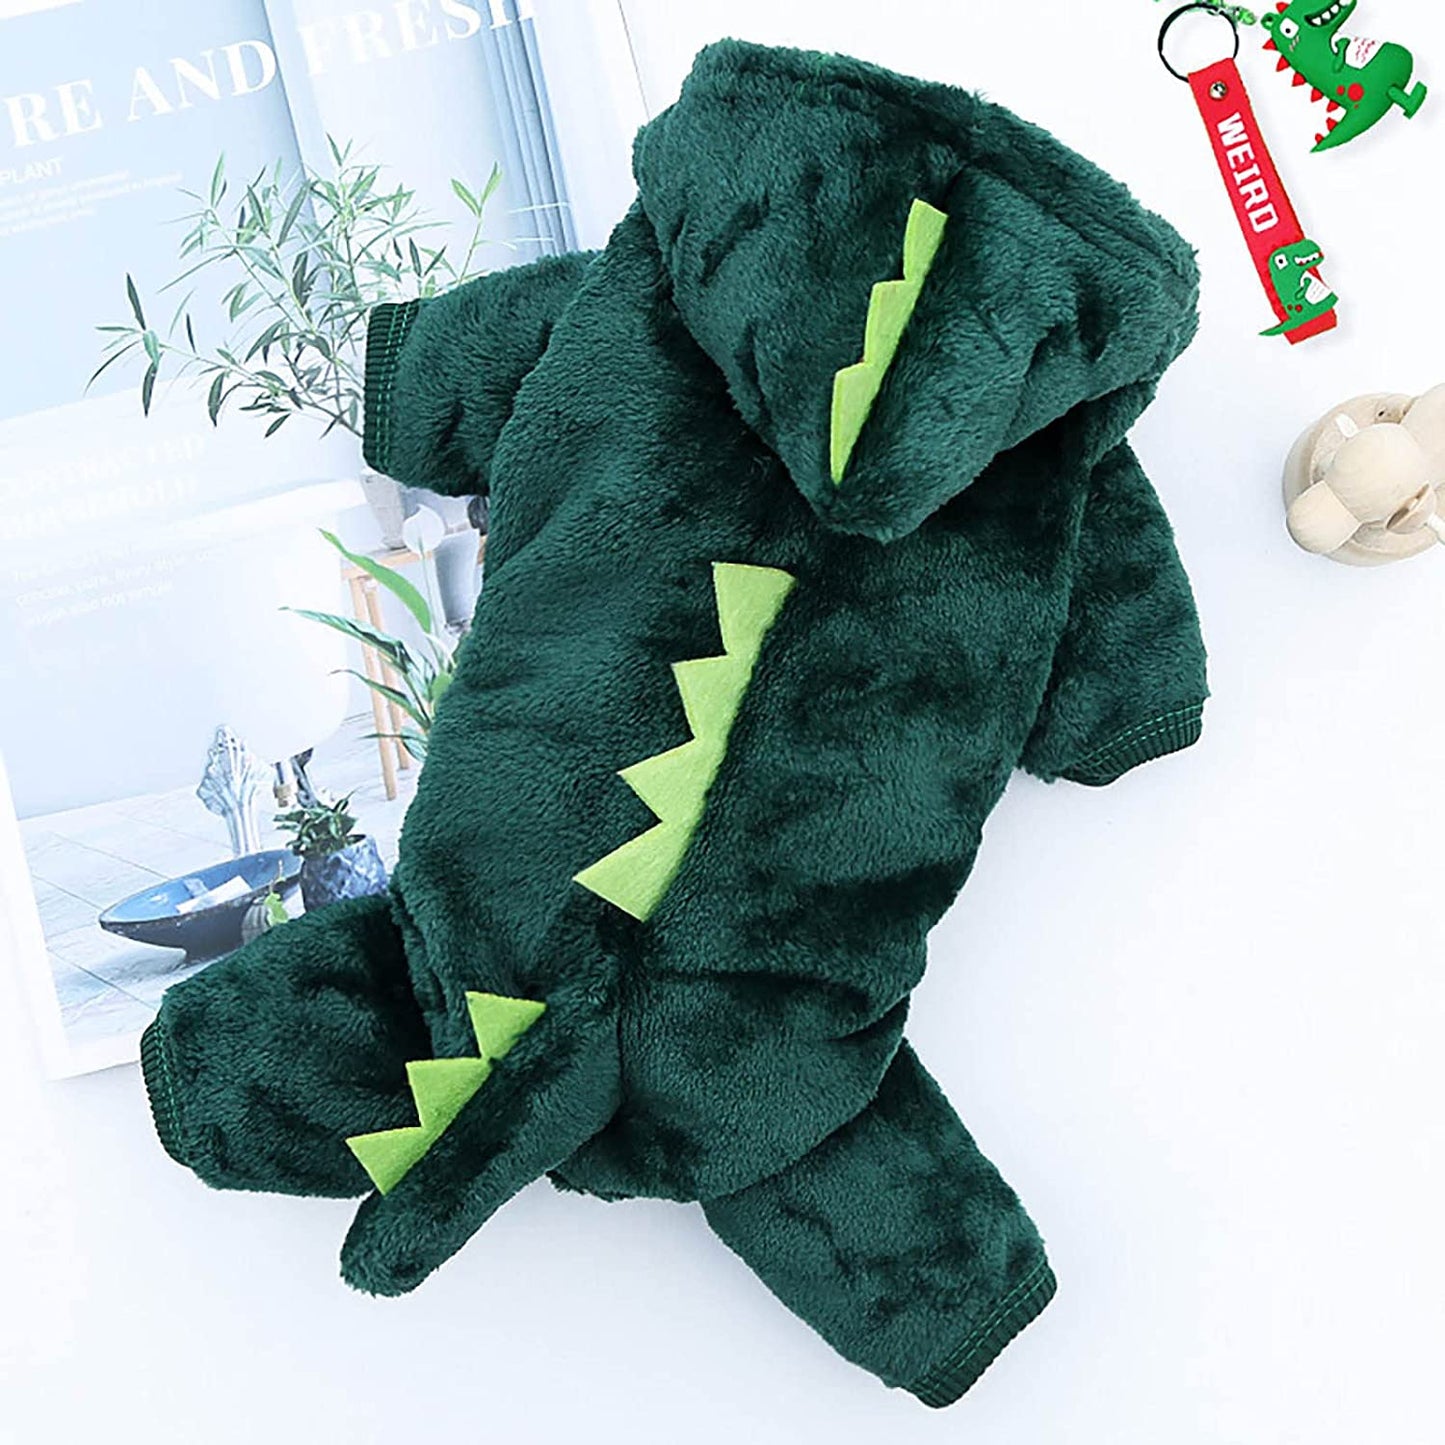 Dog Sweater Knit Dogs Clothes Small Pet Costume Halloween Dinosaur Costume Dog Clothing Puppy Outfits Funny Apperal Chihuahua Sweaters Small